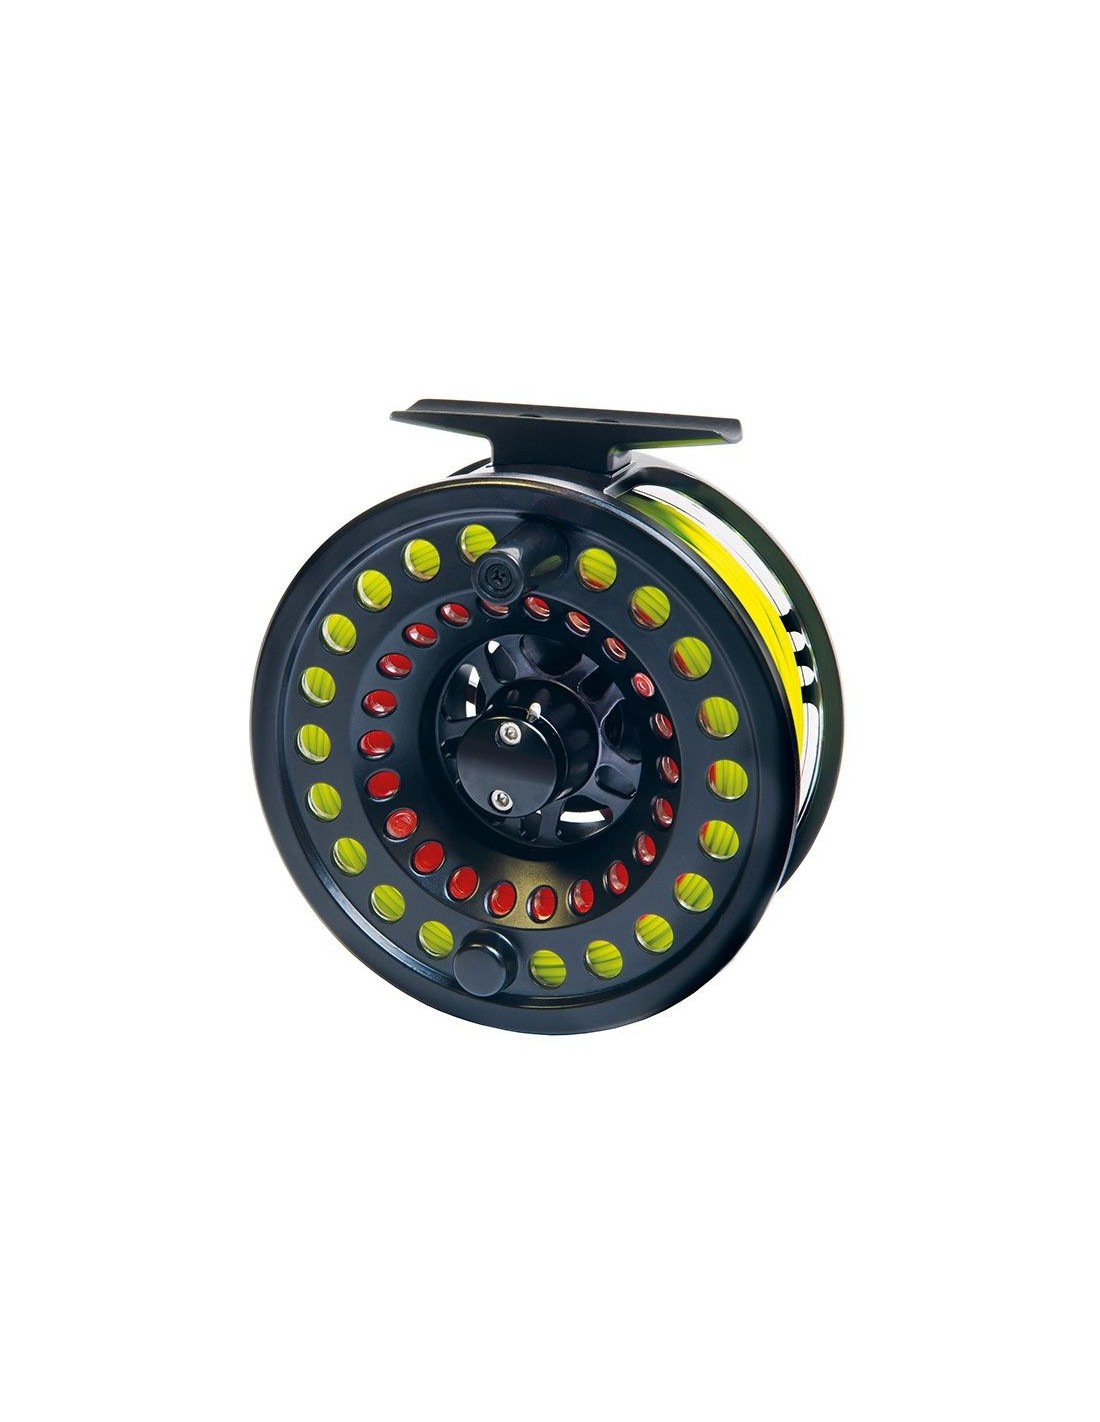 Brand New Airflo Switch Black Fly Fishing Reel Spare spool Size 4/6wt 